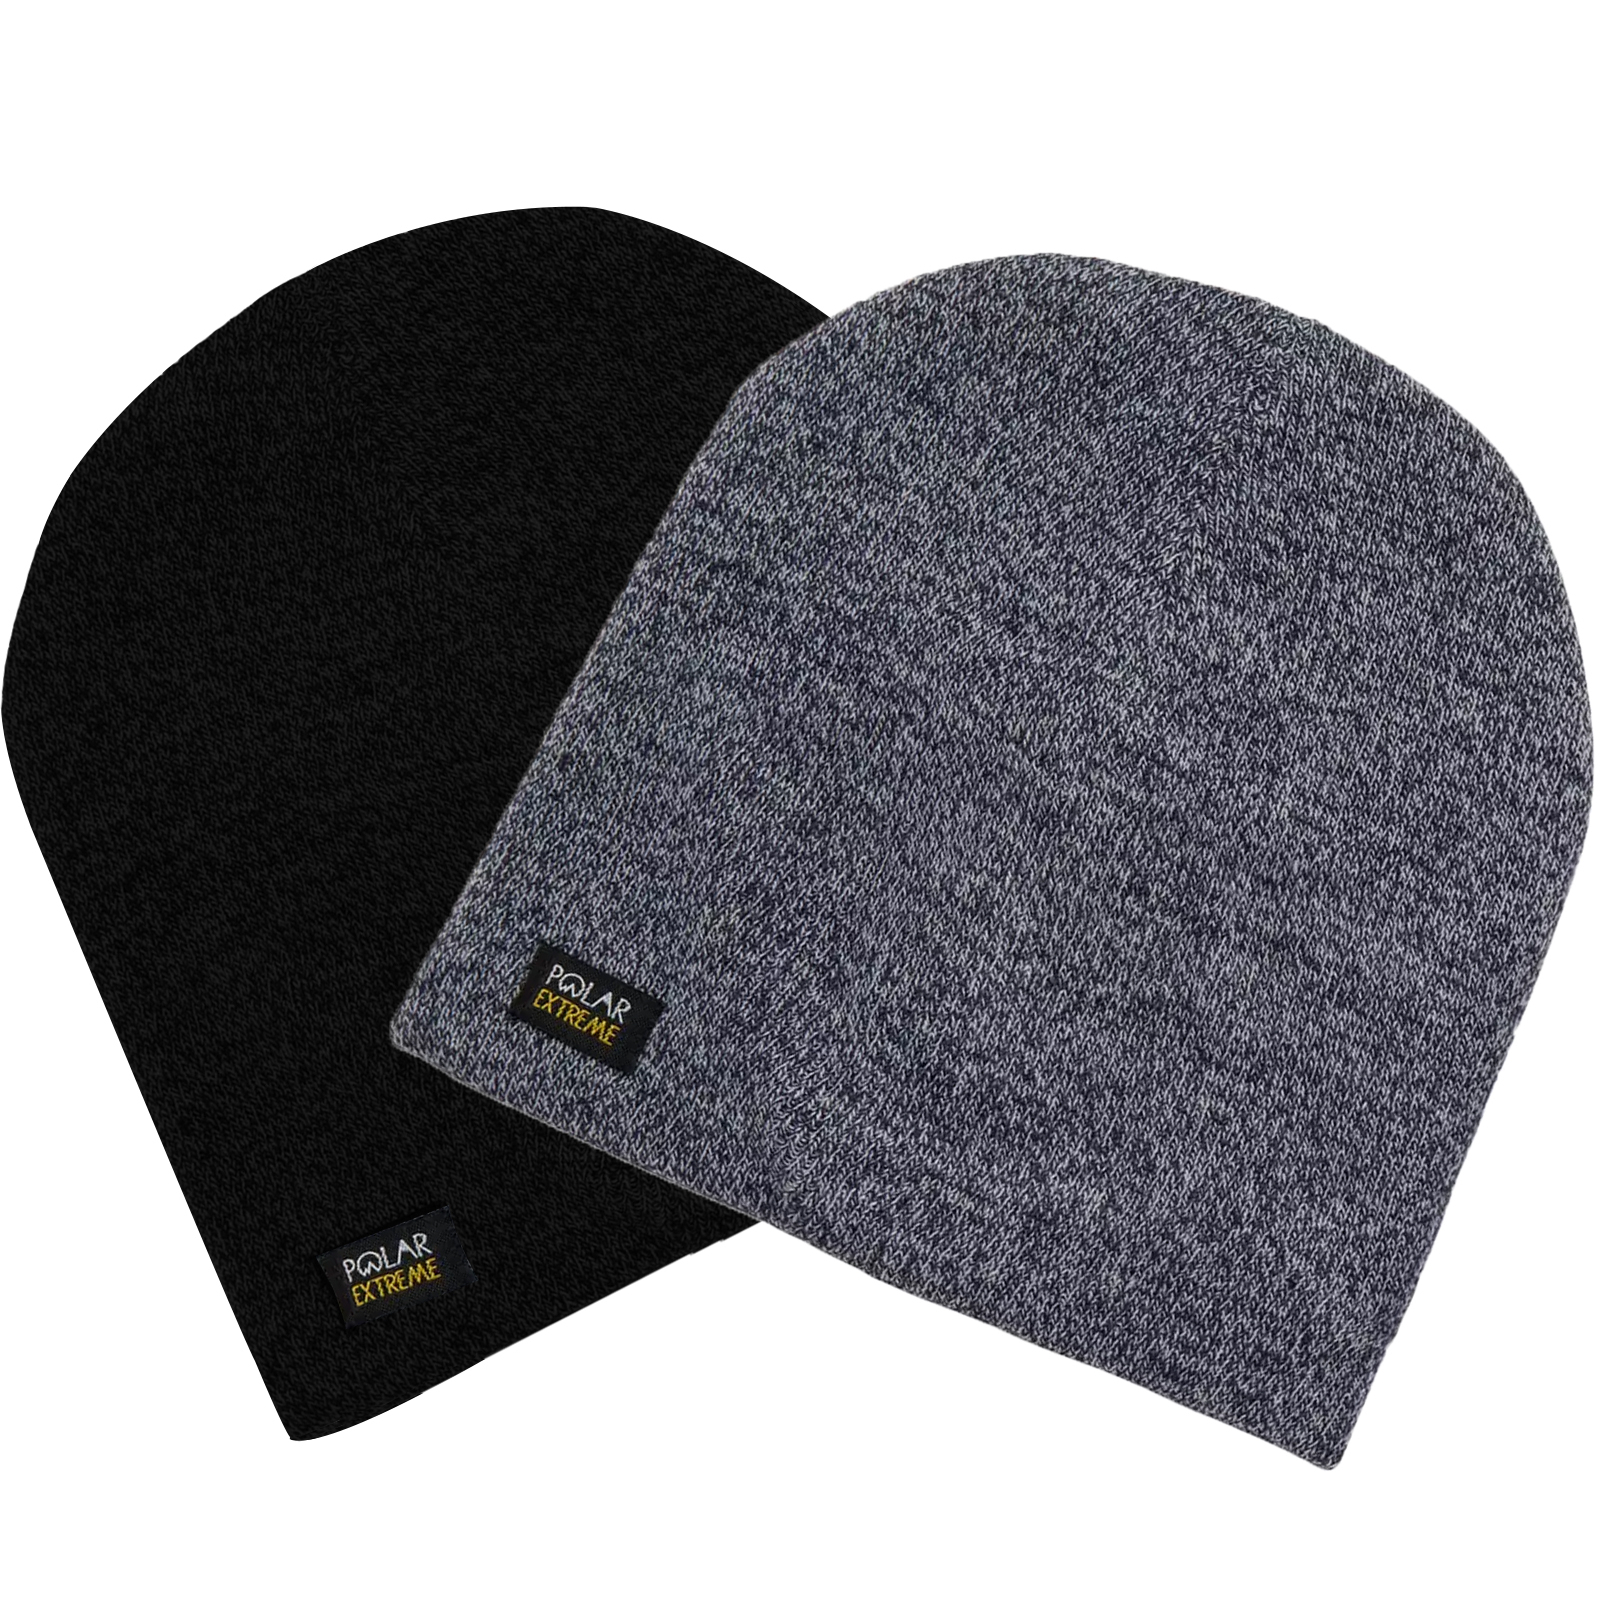 2-Pack: Men's Warm Insulated Knitted Pull Beanie Winter Thermal Hat